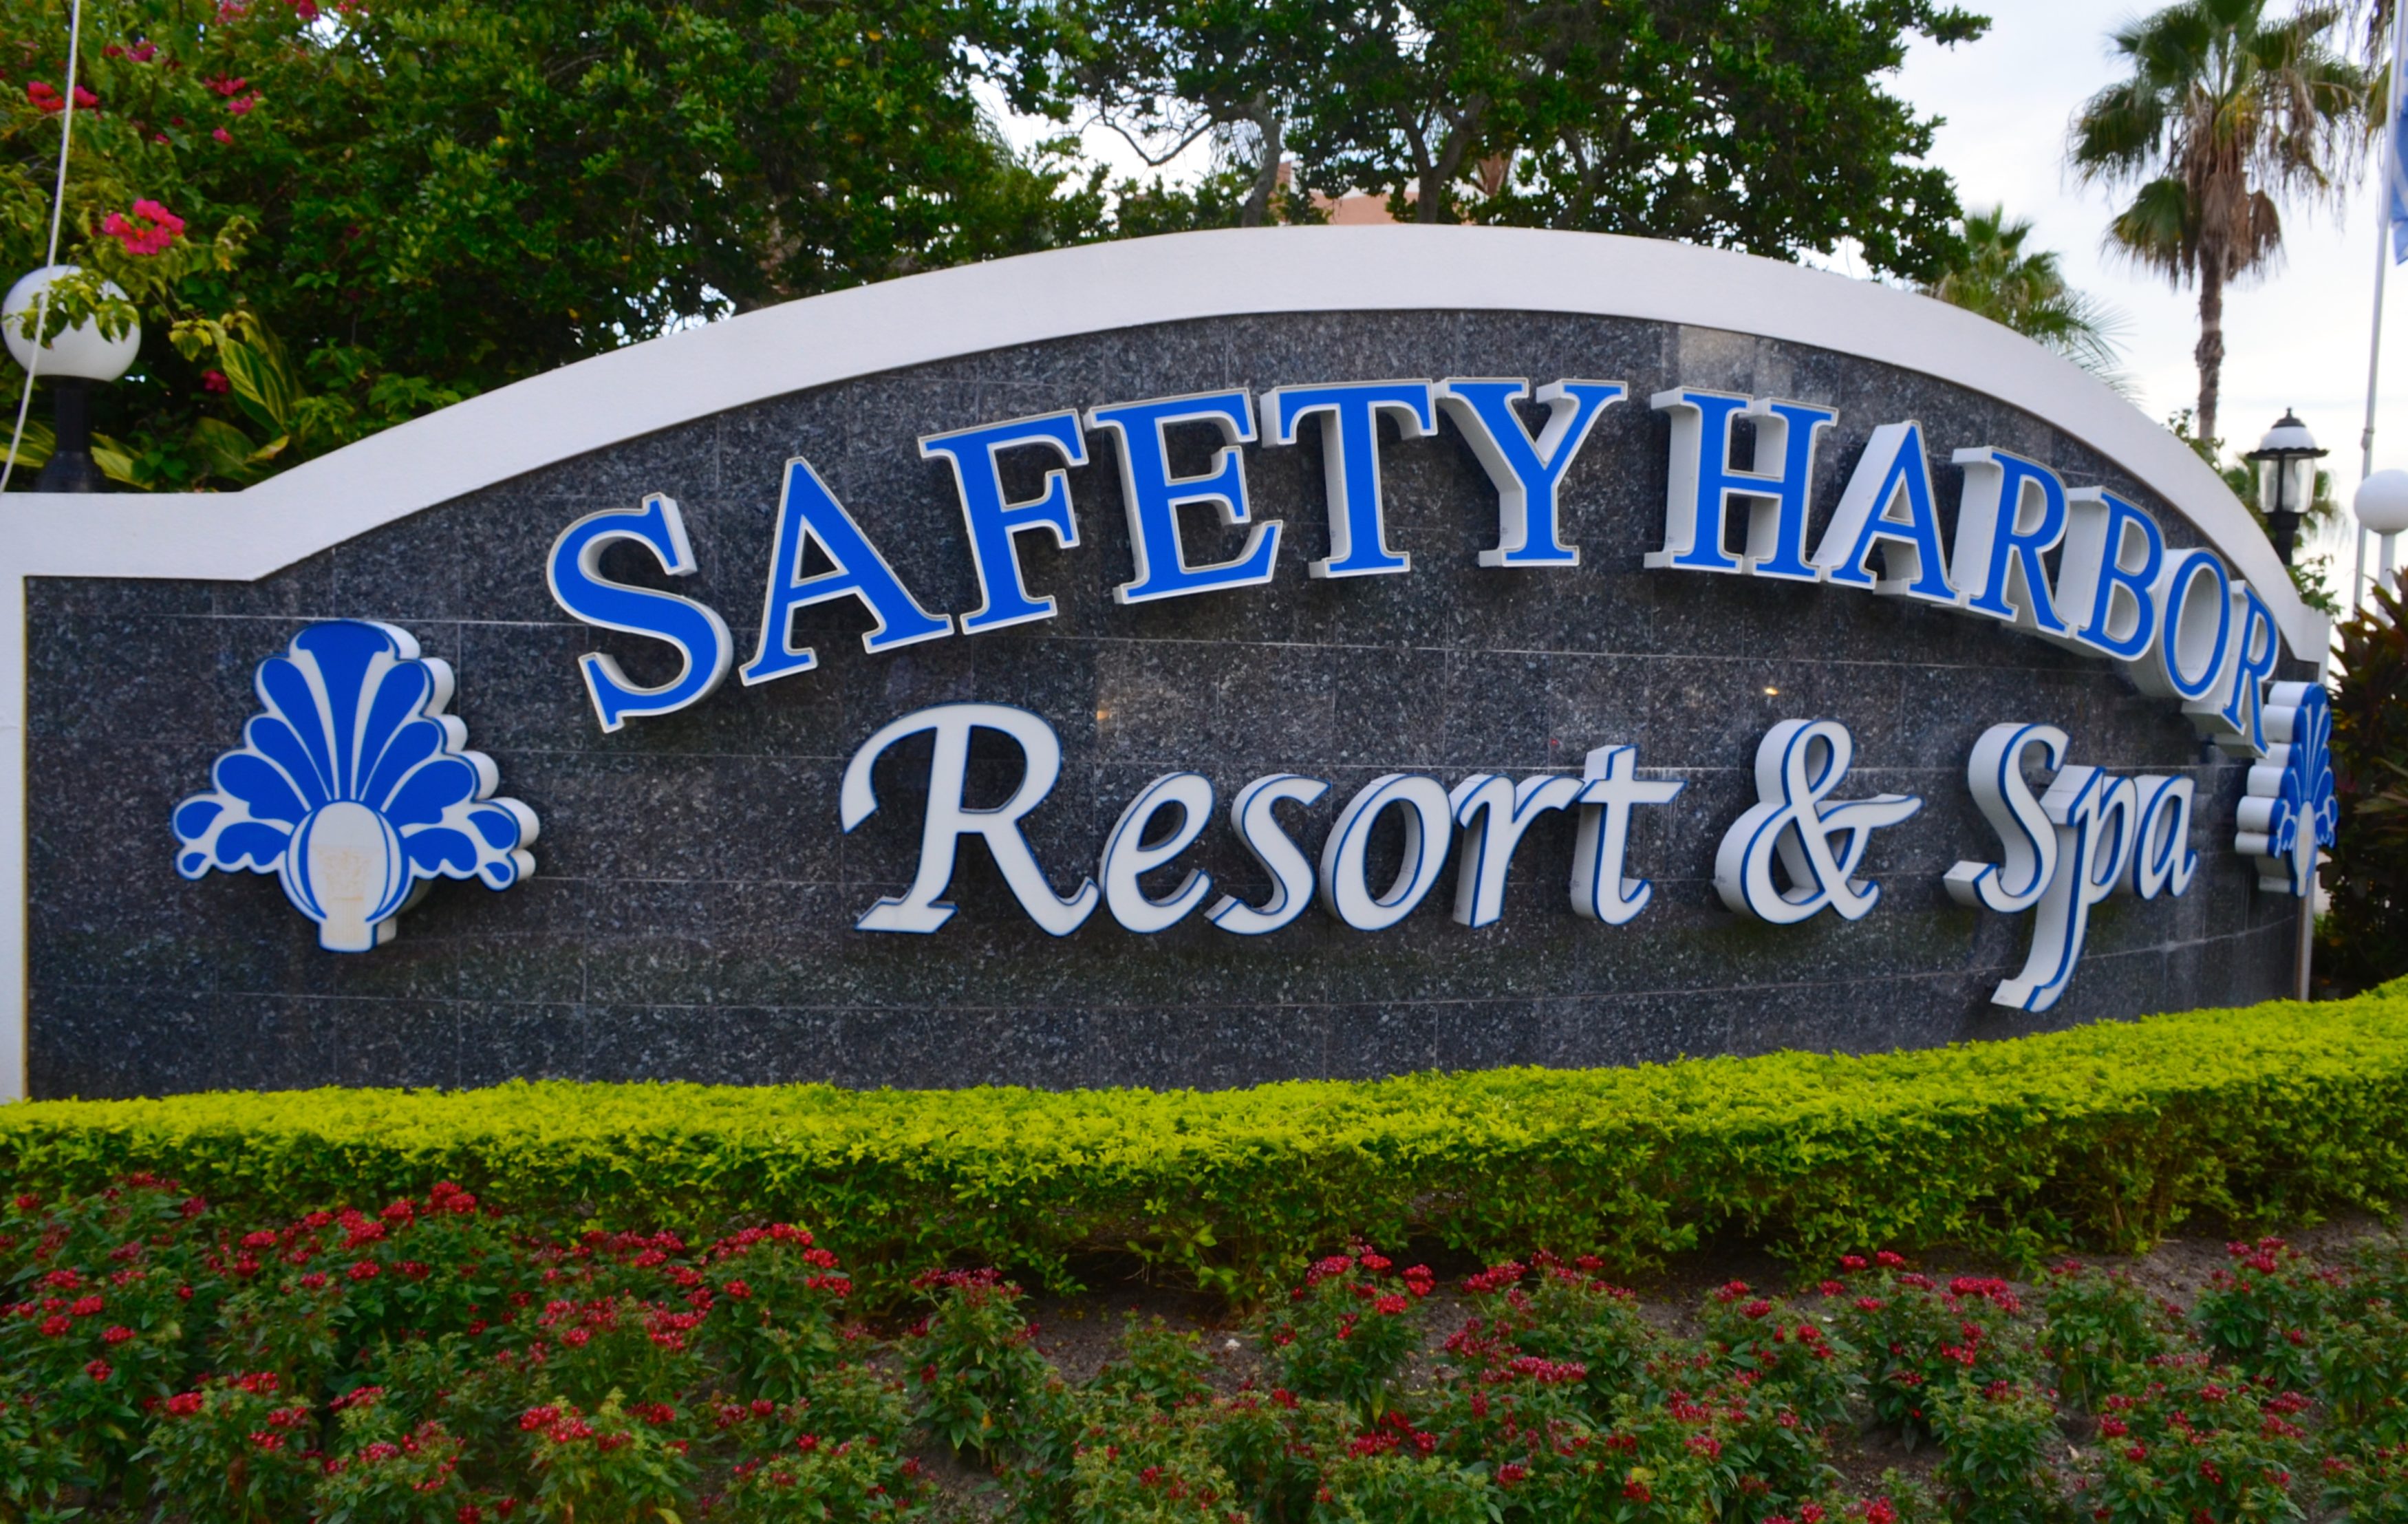 Safety-Harbor-Resort-and-Spa-3500x2215.jpg